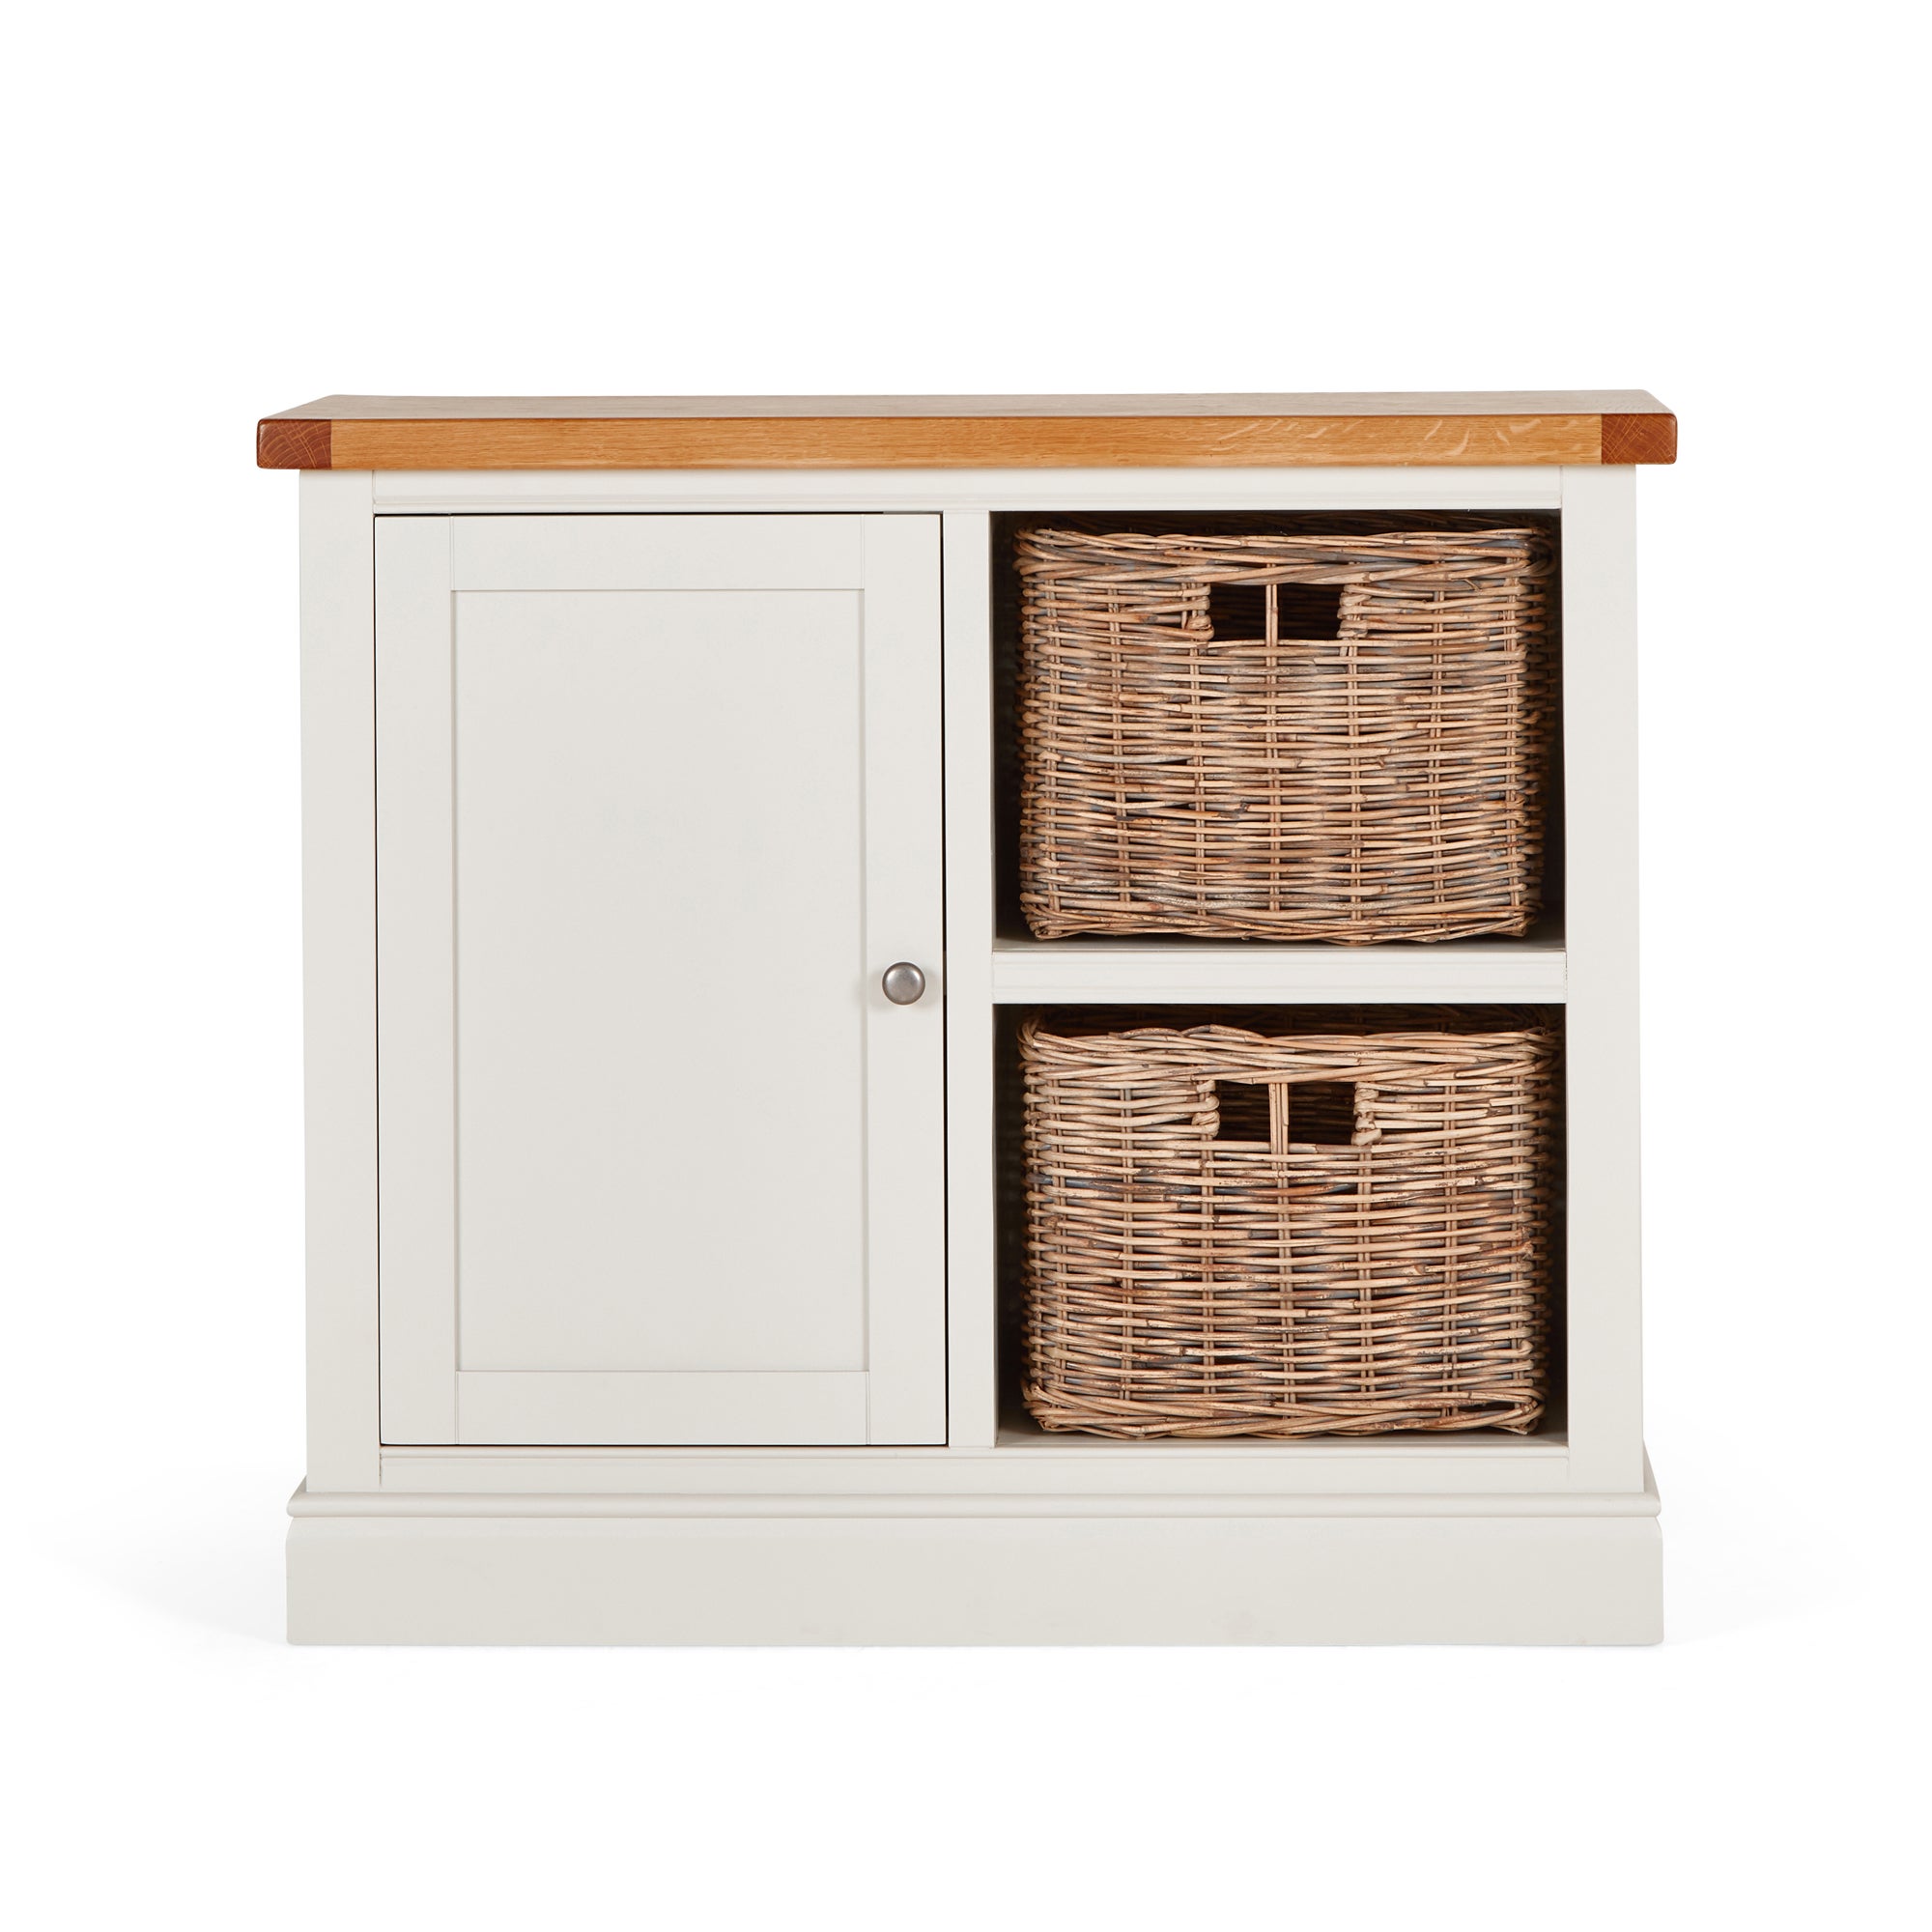 Compton Ivory Small Sideboard with Baskets